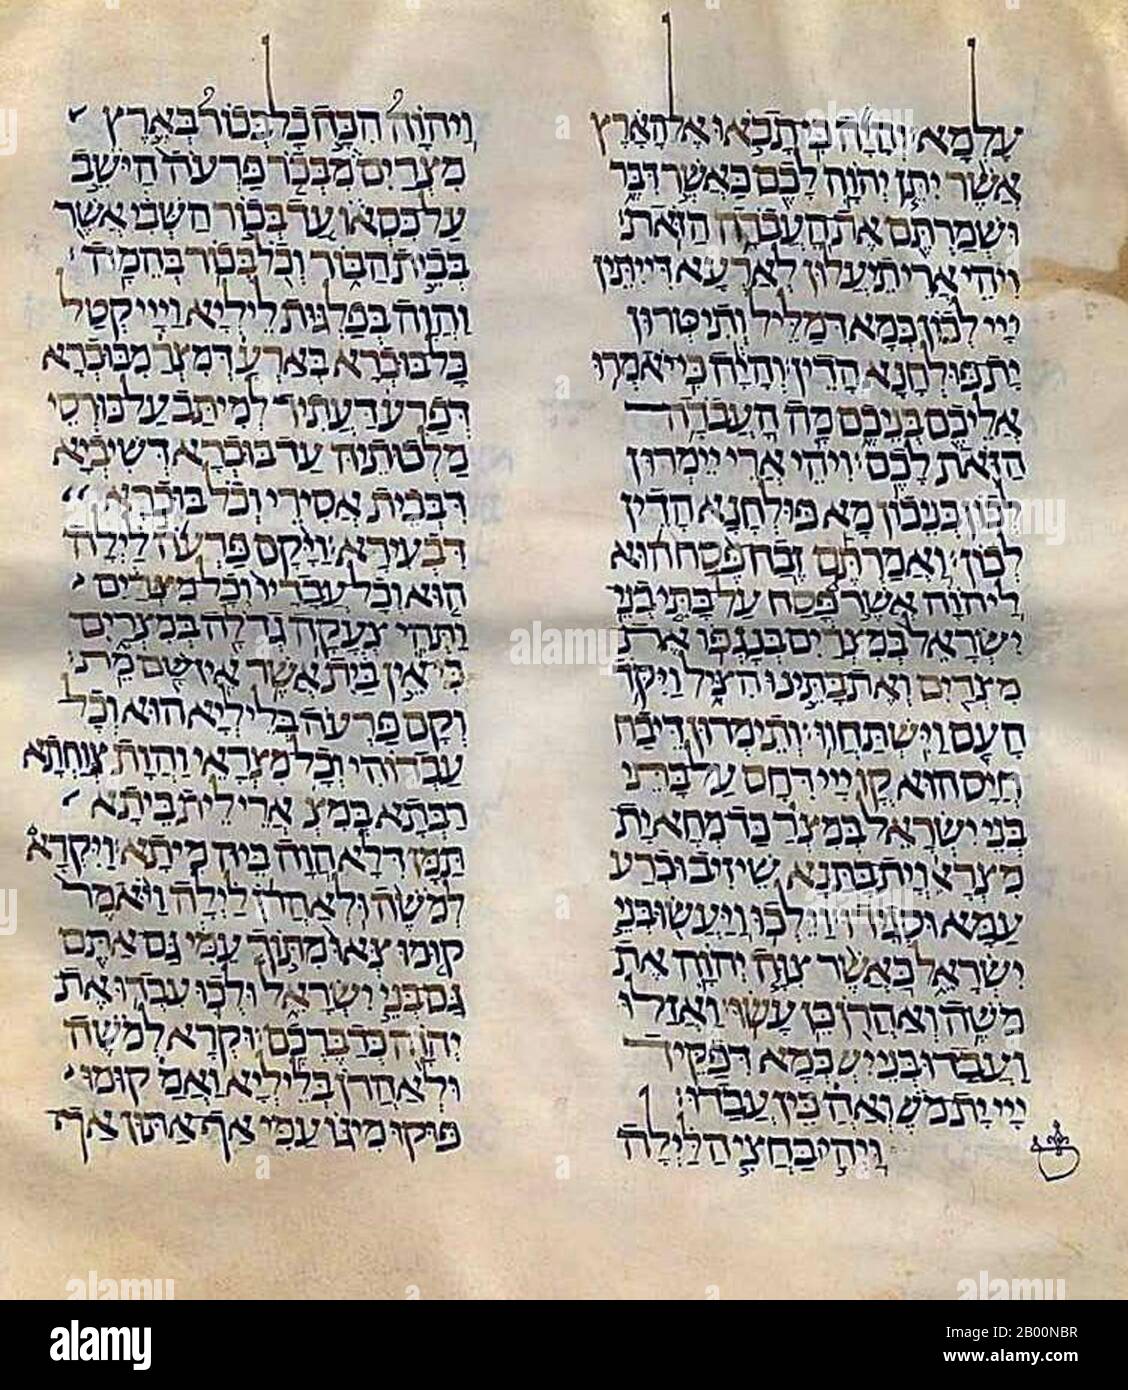 Iraq: Hebrew Script. Manuscript in Hebrew and Aramaic, first half of 11th century.  Hebrew is a West Semitic language of the Afroasiatic language family. Historically, it is regarded as the language of the Hebrews / Israelites and their ancestors. The earliest examples of written Paleo-Hebrew date from the 10th century BCE, in the form of primitive drawings.  Aramaic is a family of languages (traditionally referred to as 'dialects') belonging to the Semitic family. More specifically, it is a part of the Northwest Semitic subfamily, which also includes Canaanite languages such as Hebrew. Stock Photo